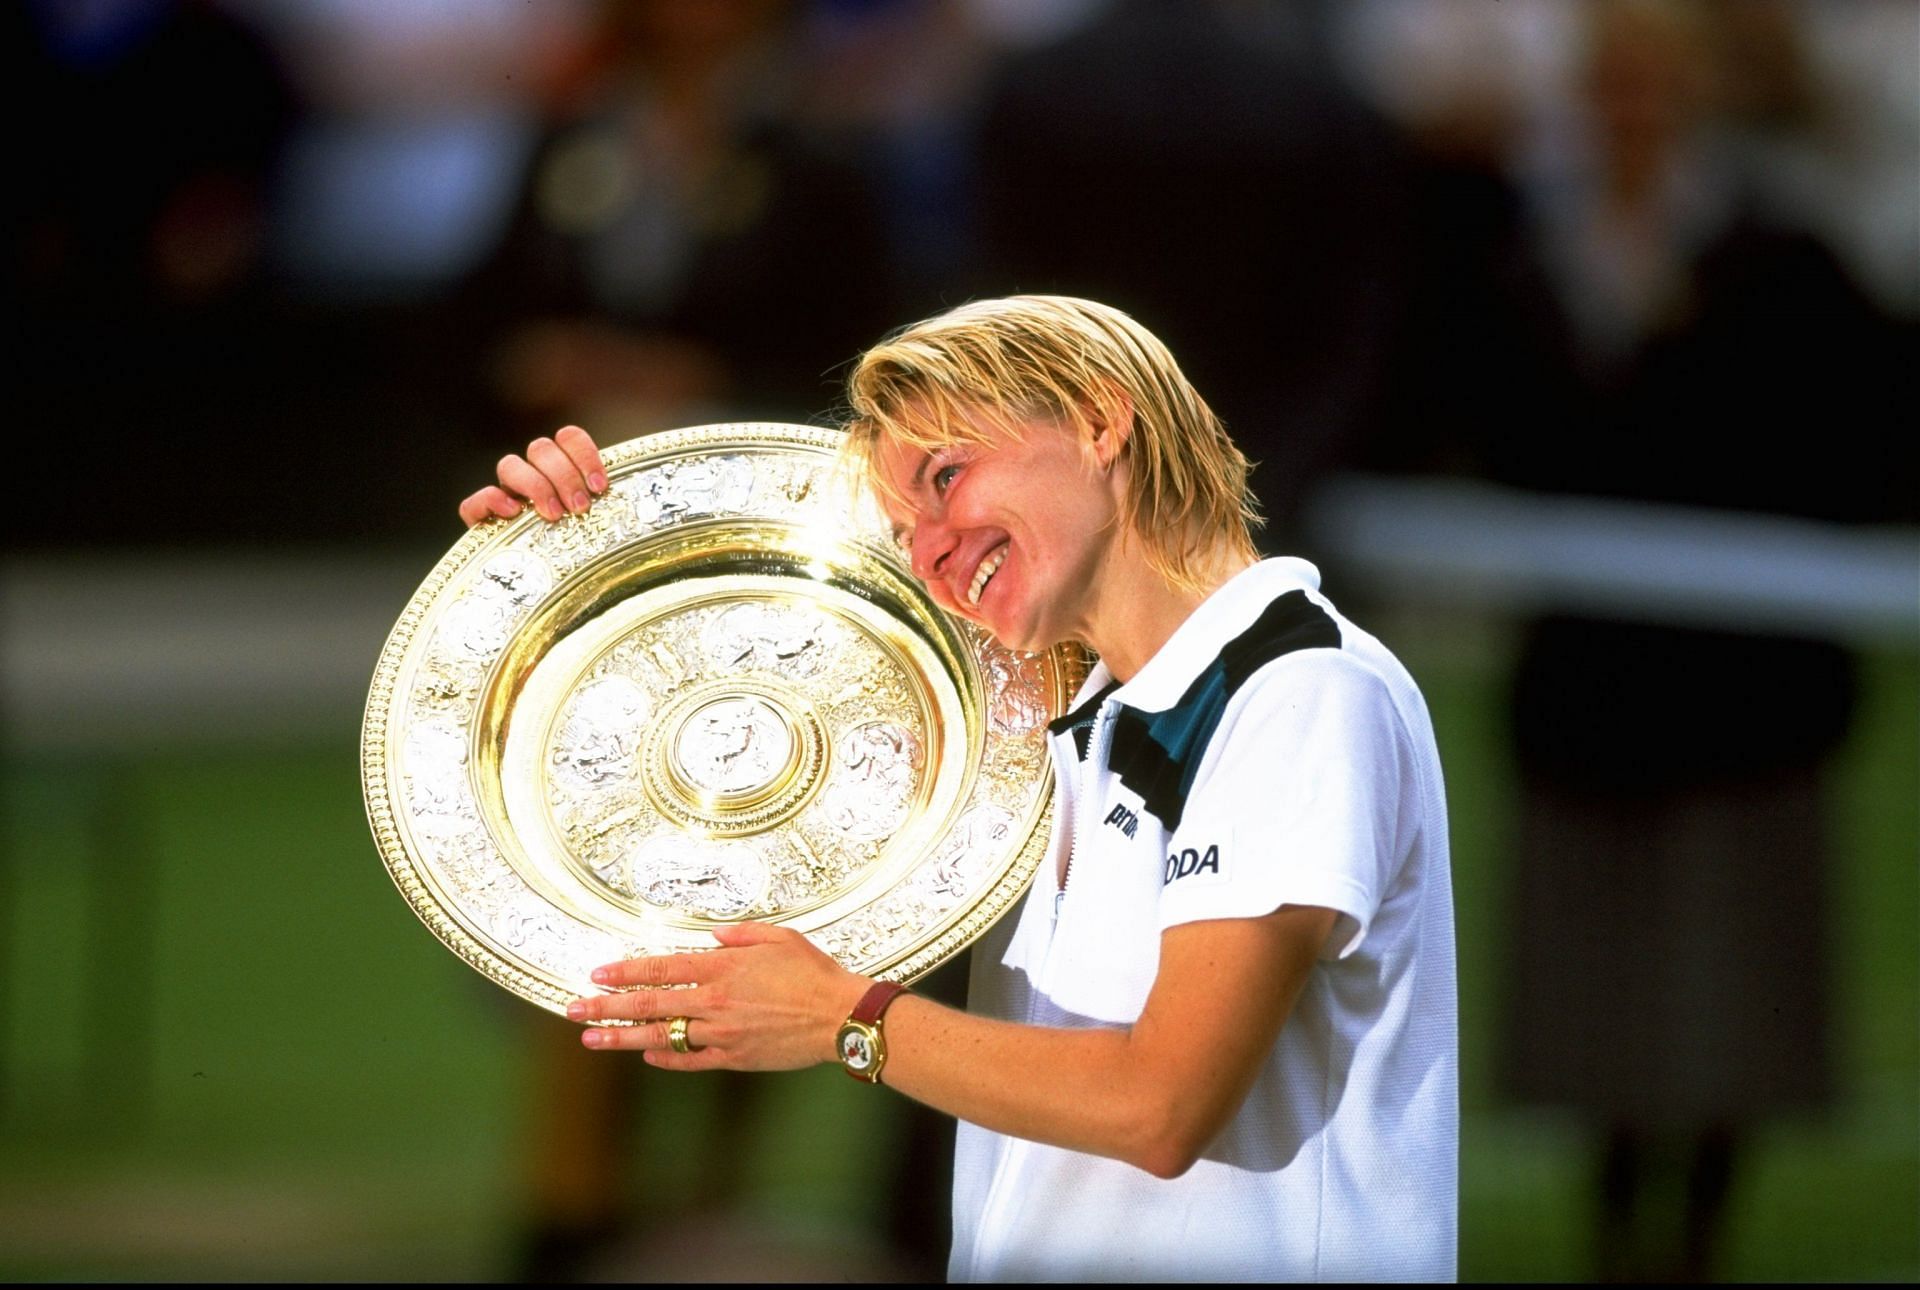 Jana Novotna of the Czech Republic poses with her trophy